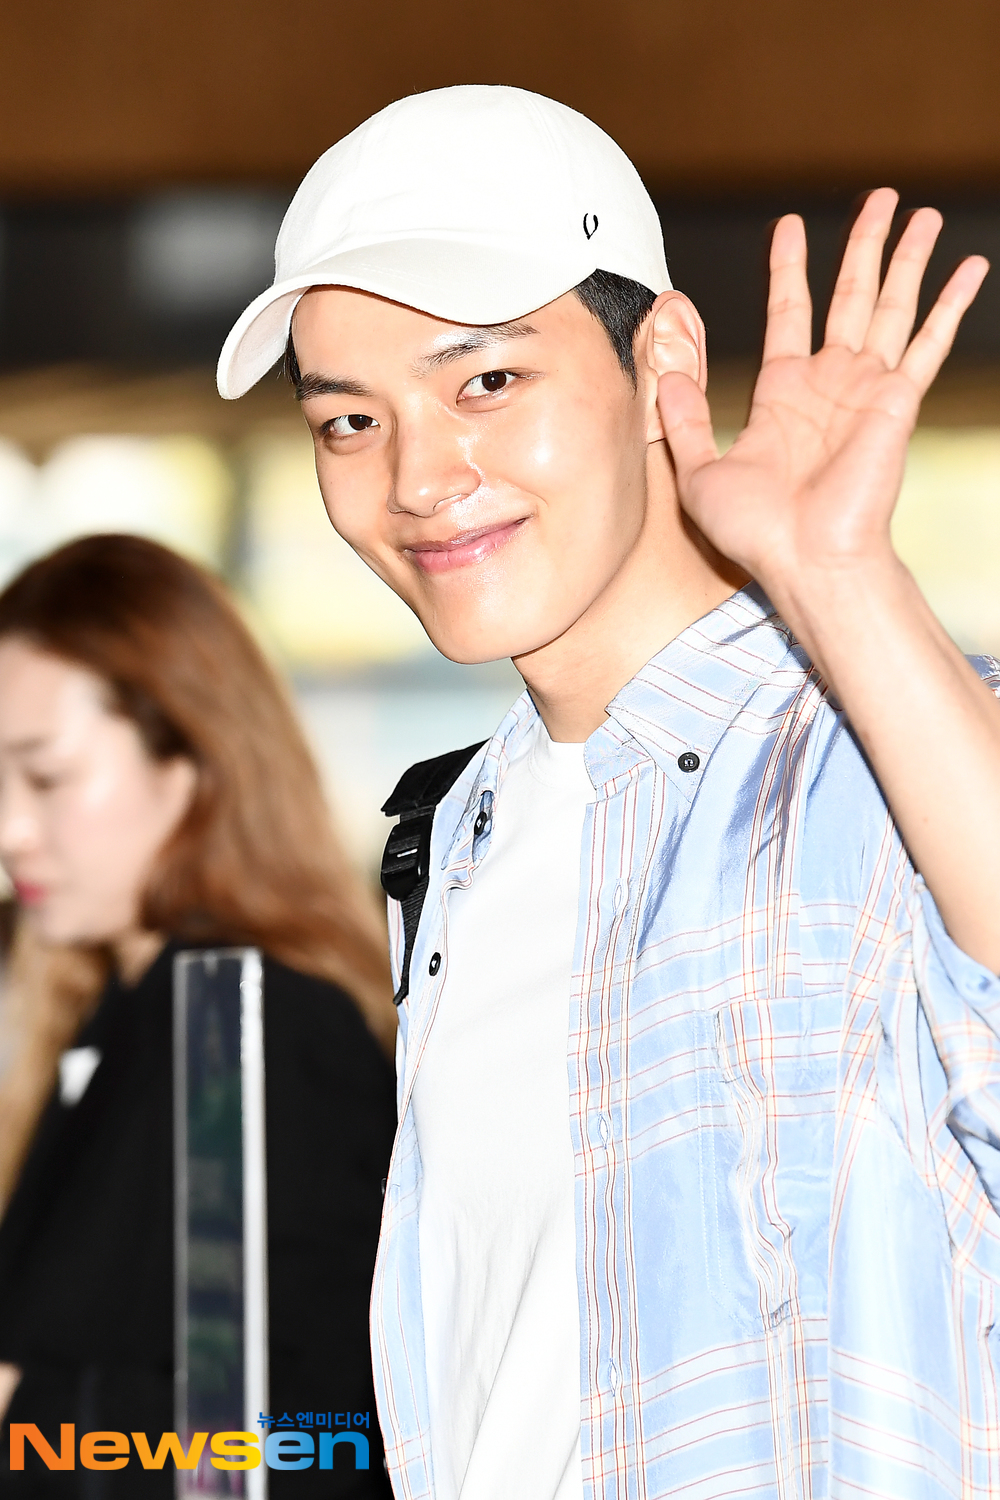 Actor Yeo Jin-goo (Yeo Jin-goo) departed for Japan Tokyo Haneda, a schedule for overseas fan meetings, at JAPAN FANMEETING 2019 - Brilliant Spring Day-, which will be held in Japan via Gimpo International Airport in Banghwa-dong, Gangseo-gu, Seoul, on the afternoon of April 12.Actor Yeo Jin-goo (Yeo Jin-goo) is leaving for Tokyo Haneda.exponential earthquake